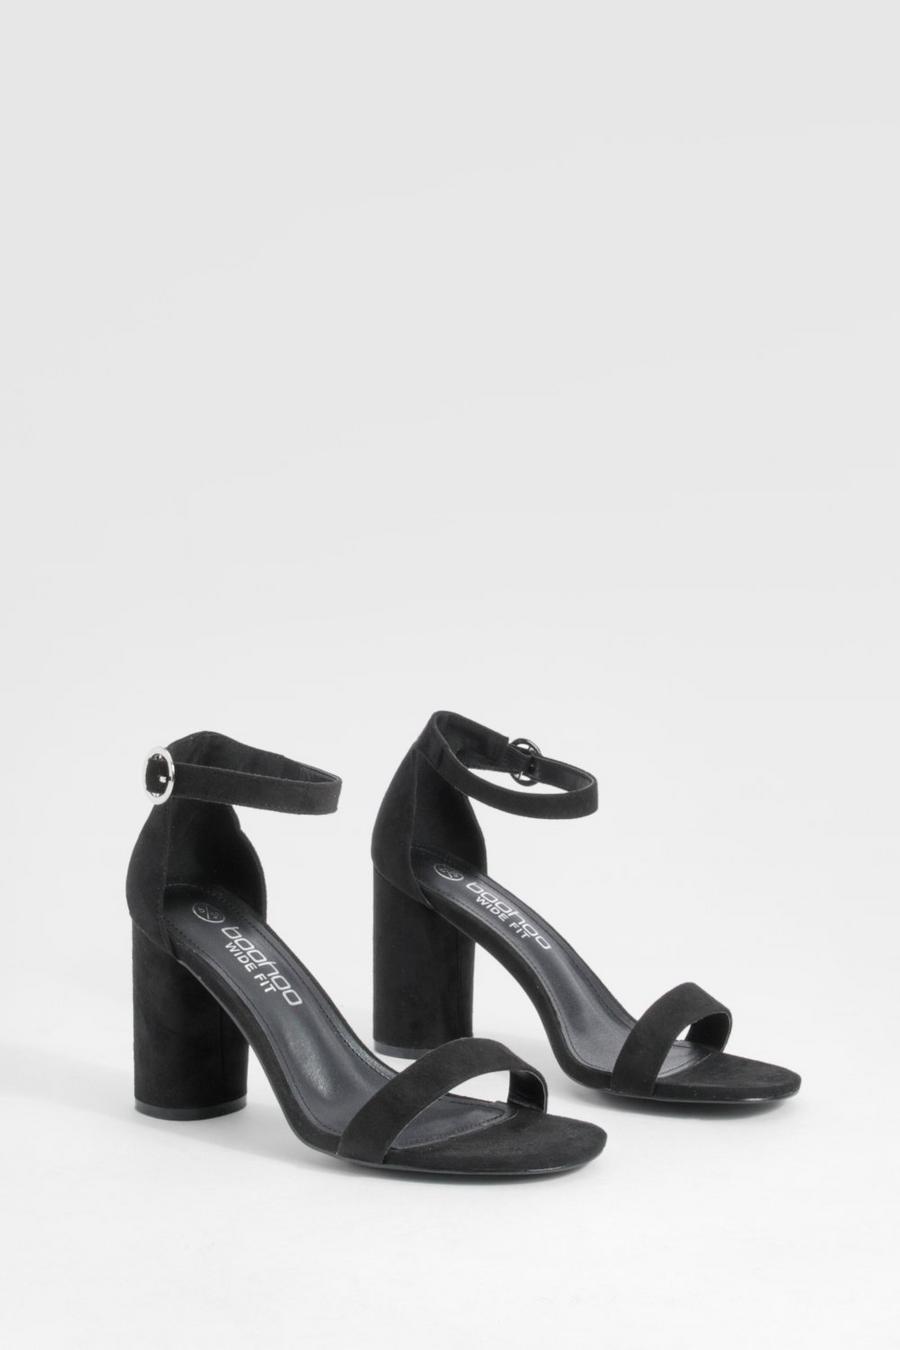 Black Wide Fit Rounded Heel 2 Part Barely There Heels